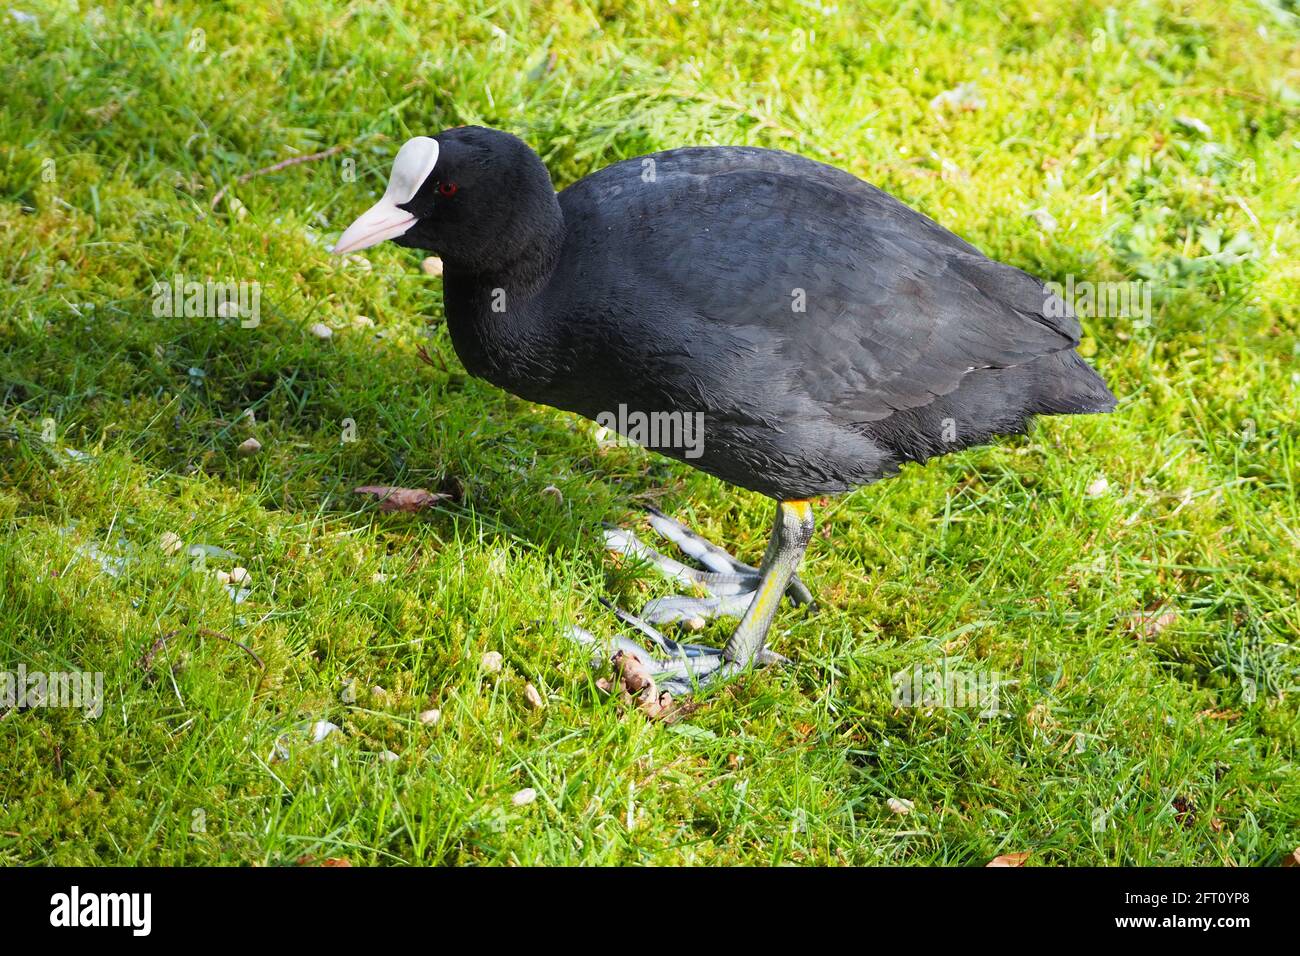 Coot strolling along the Lawn Stock Photo